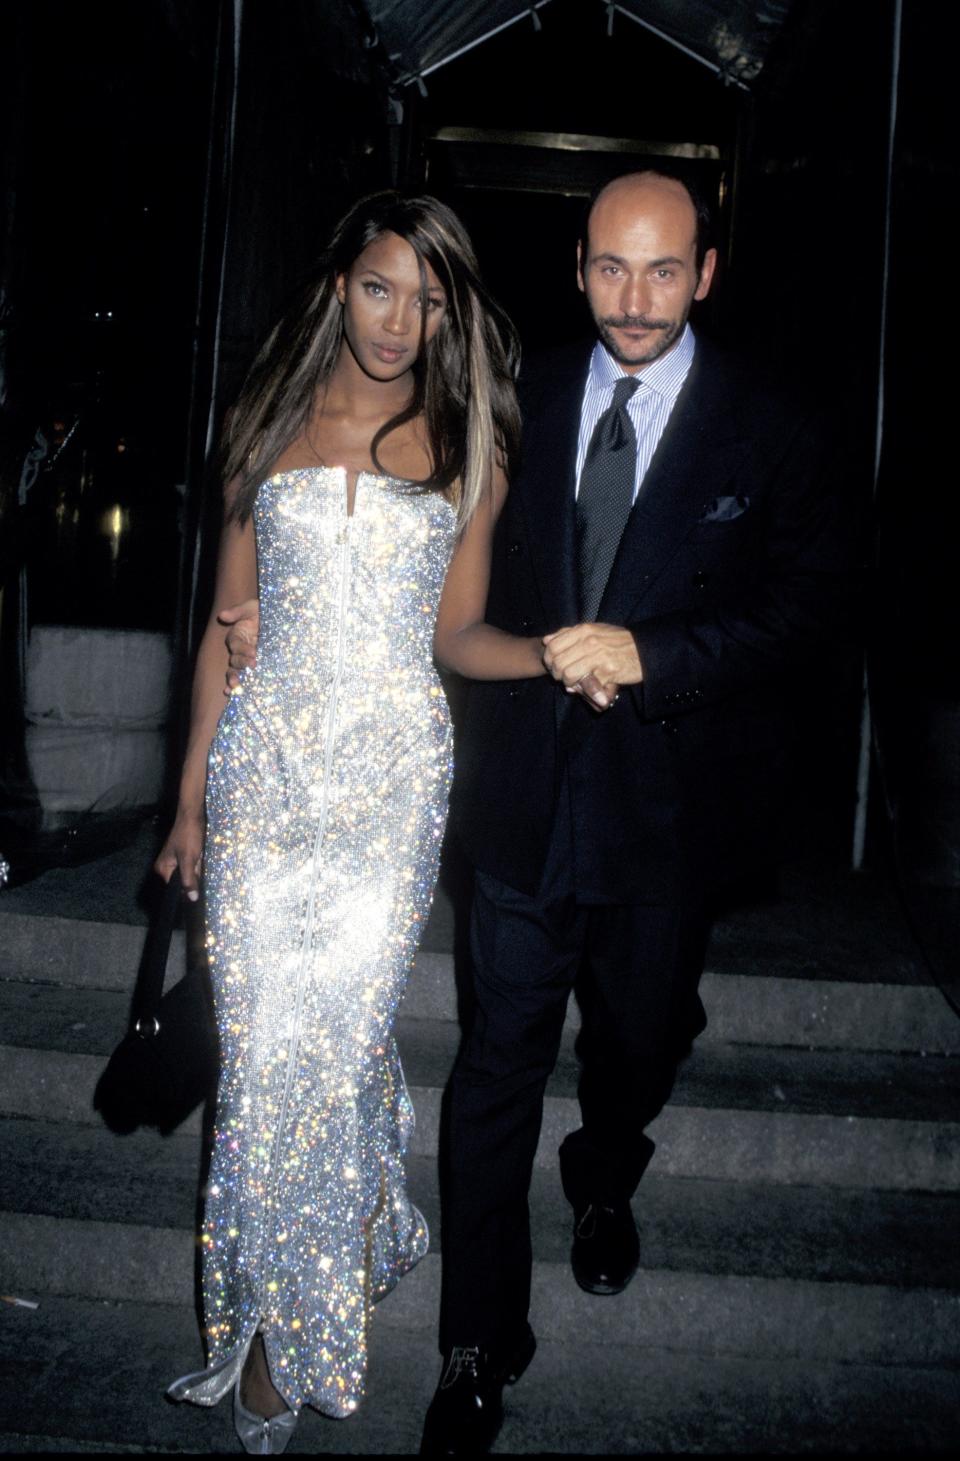 Naomi Campbell attends the 1995 Met Gala in a shimmering silver gown.